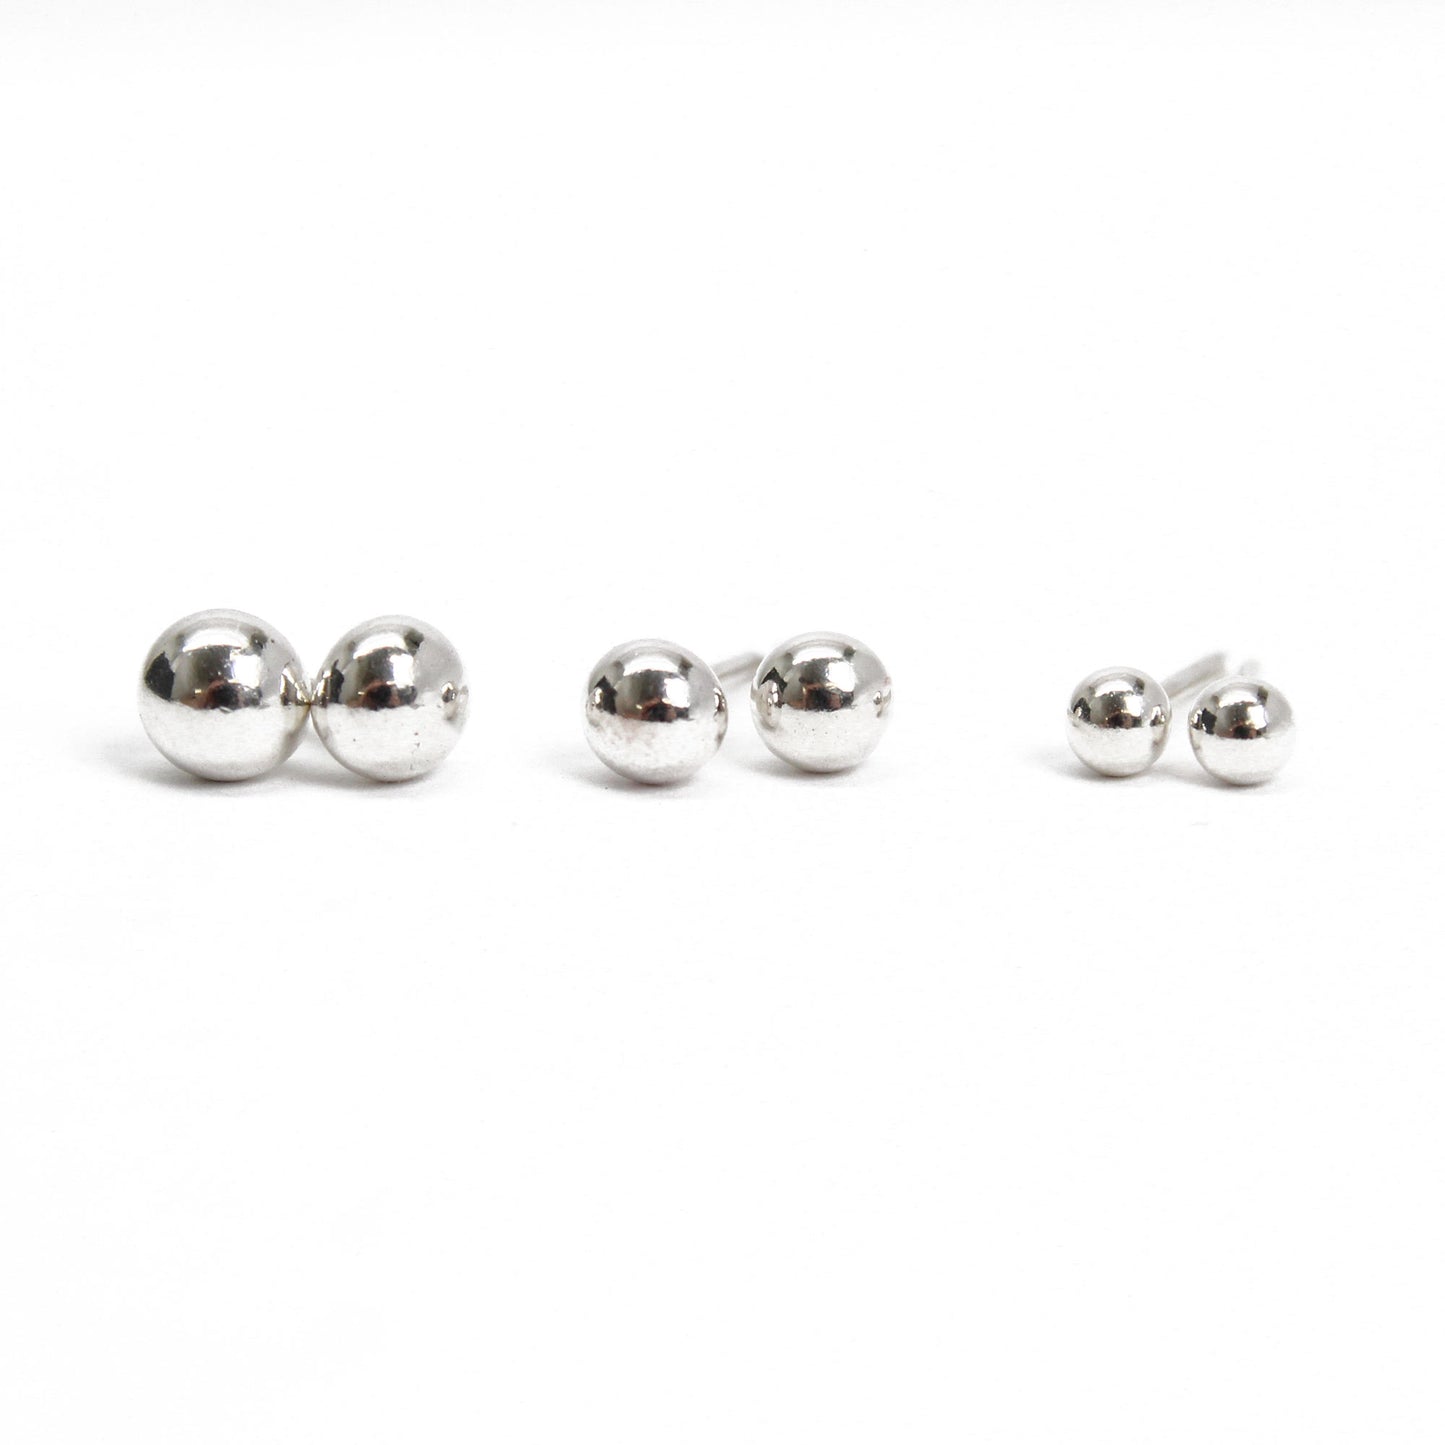 14K White Gold Studs, Tiny Solid White Gold Stud Earrings 14K White Gold / 2mm (Very Tiny)